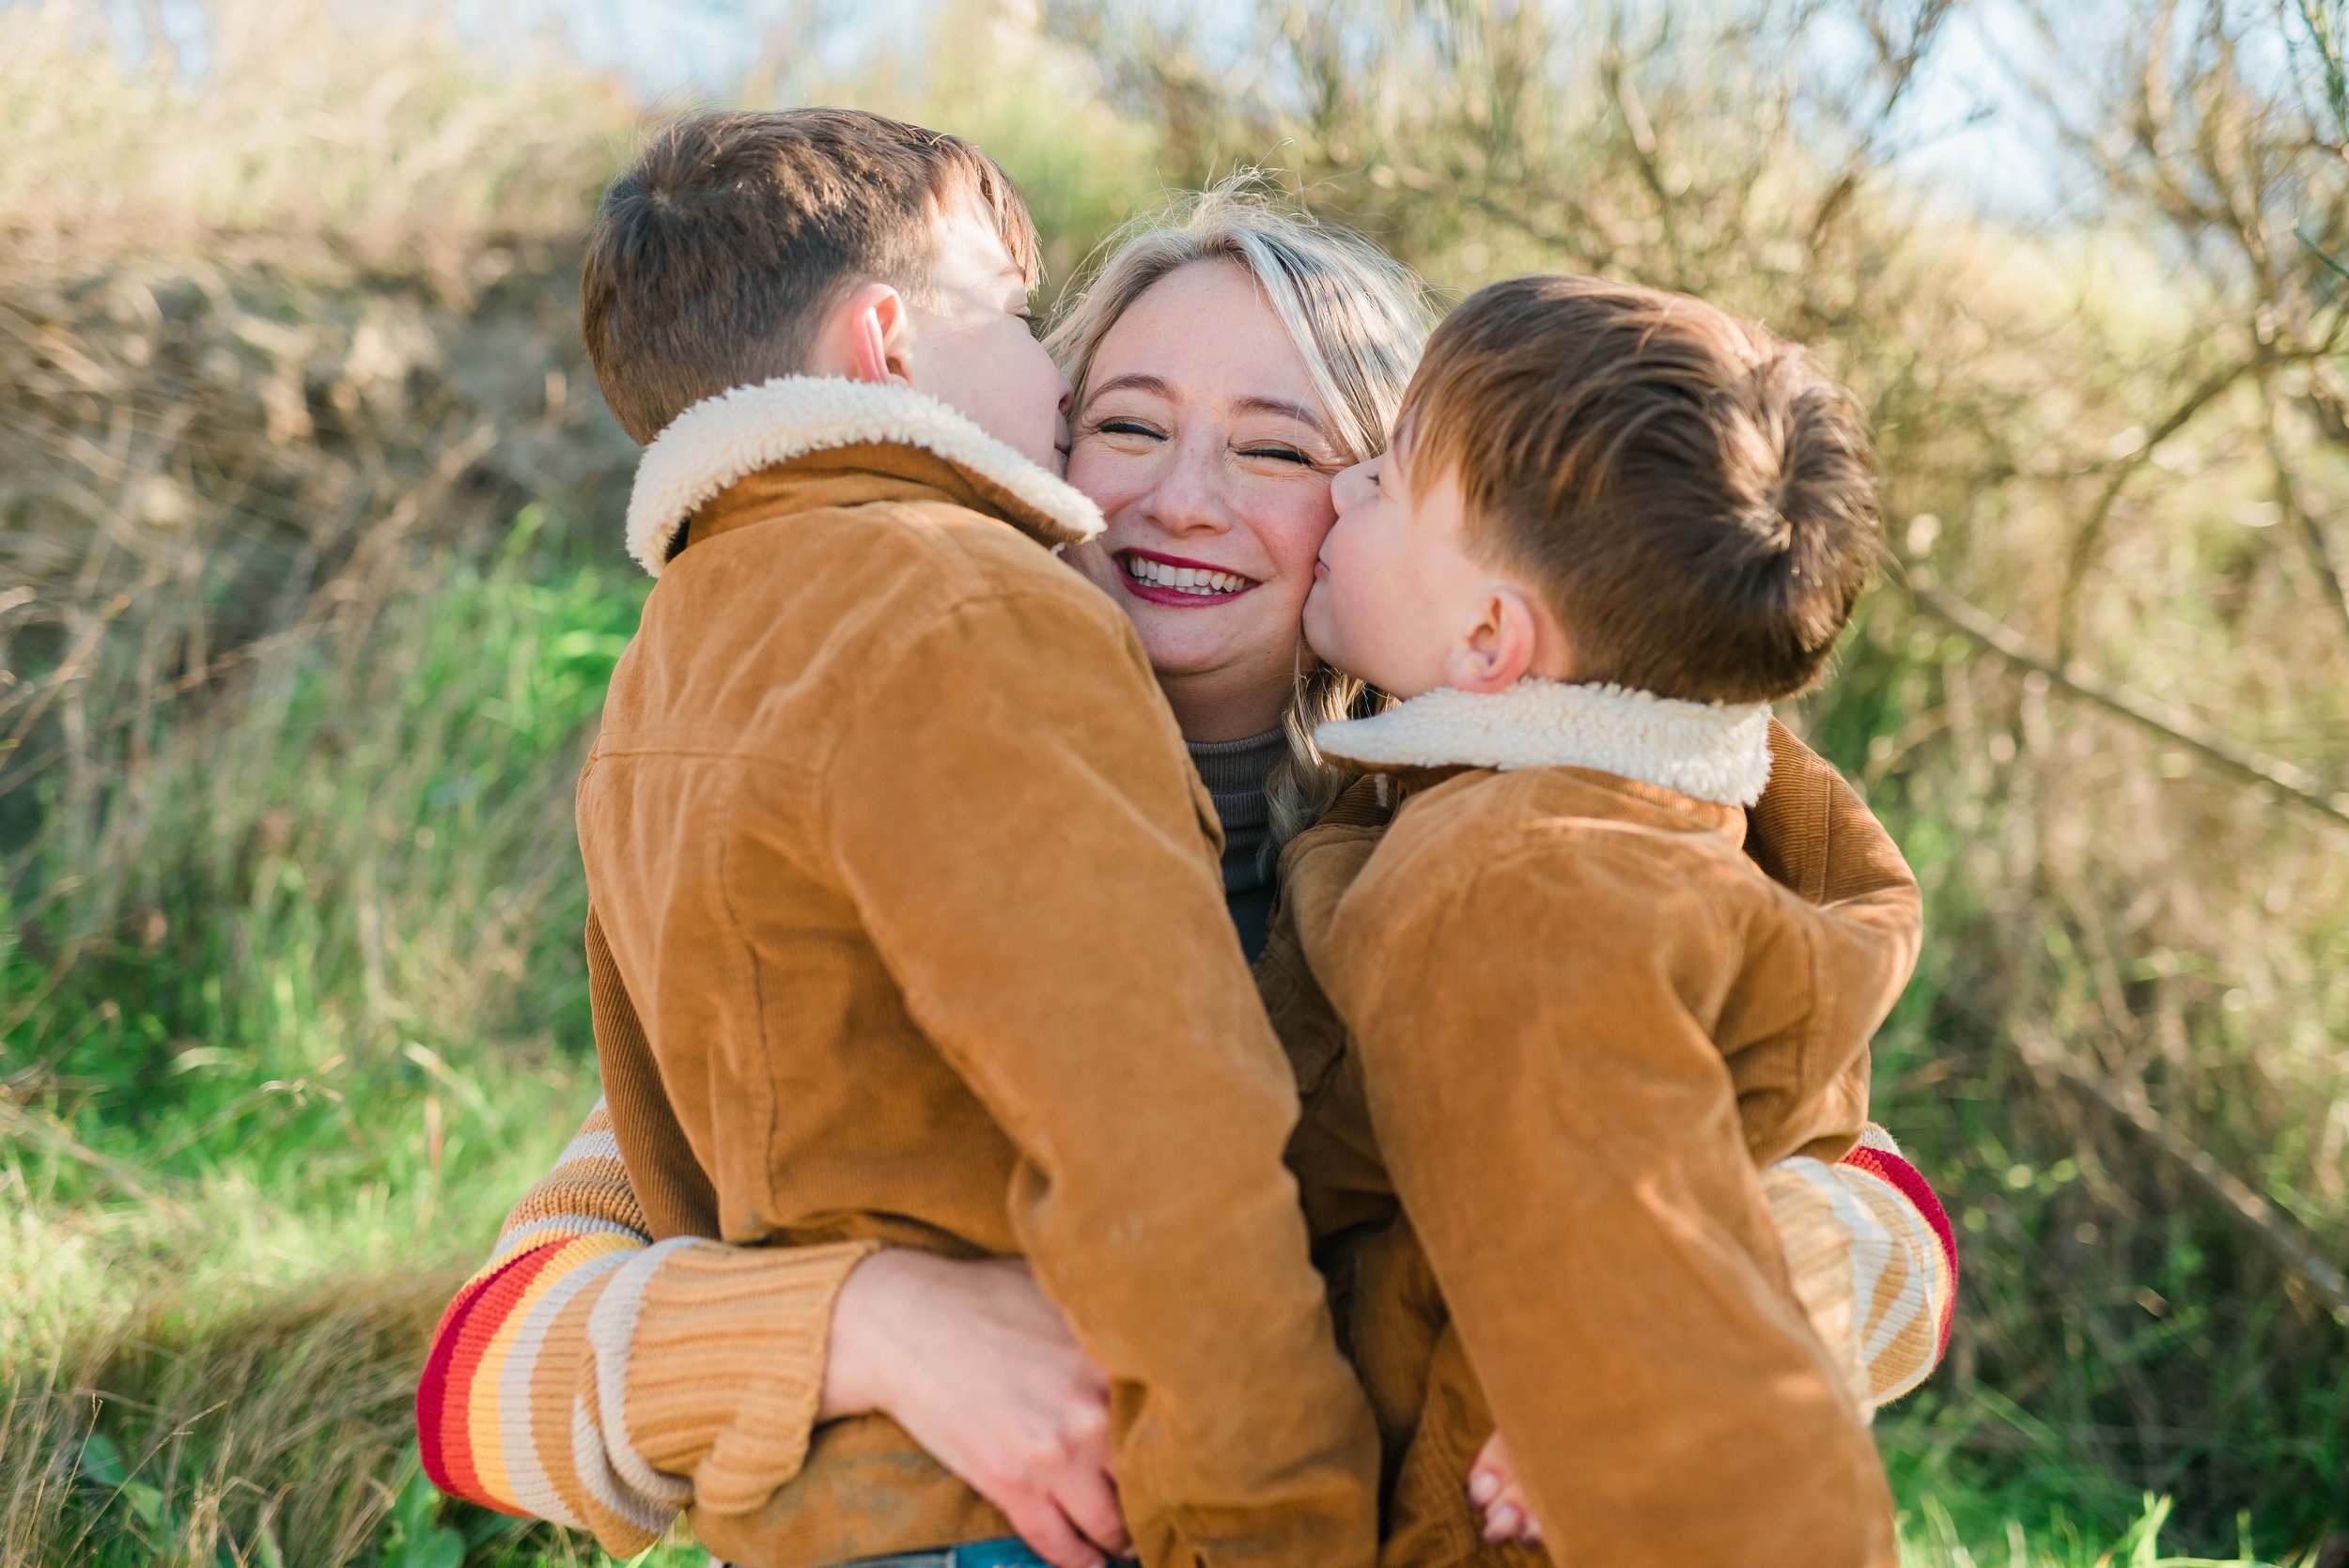  Mom getting kissed on the cheeks by twin sons. 